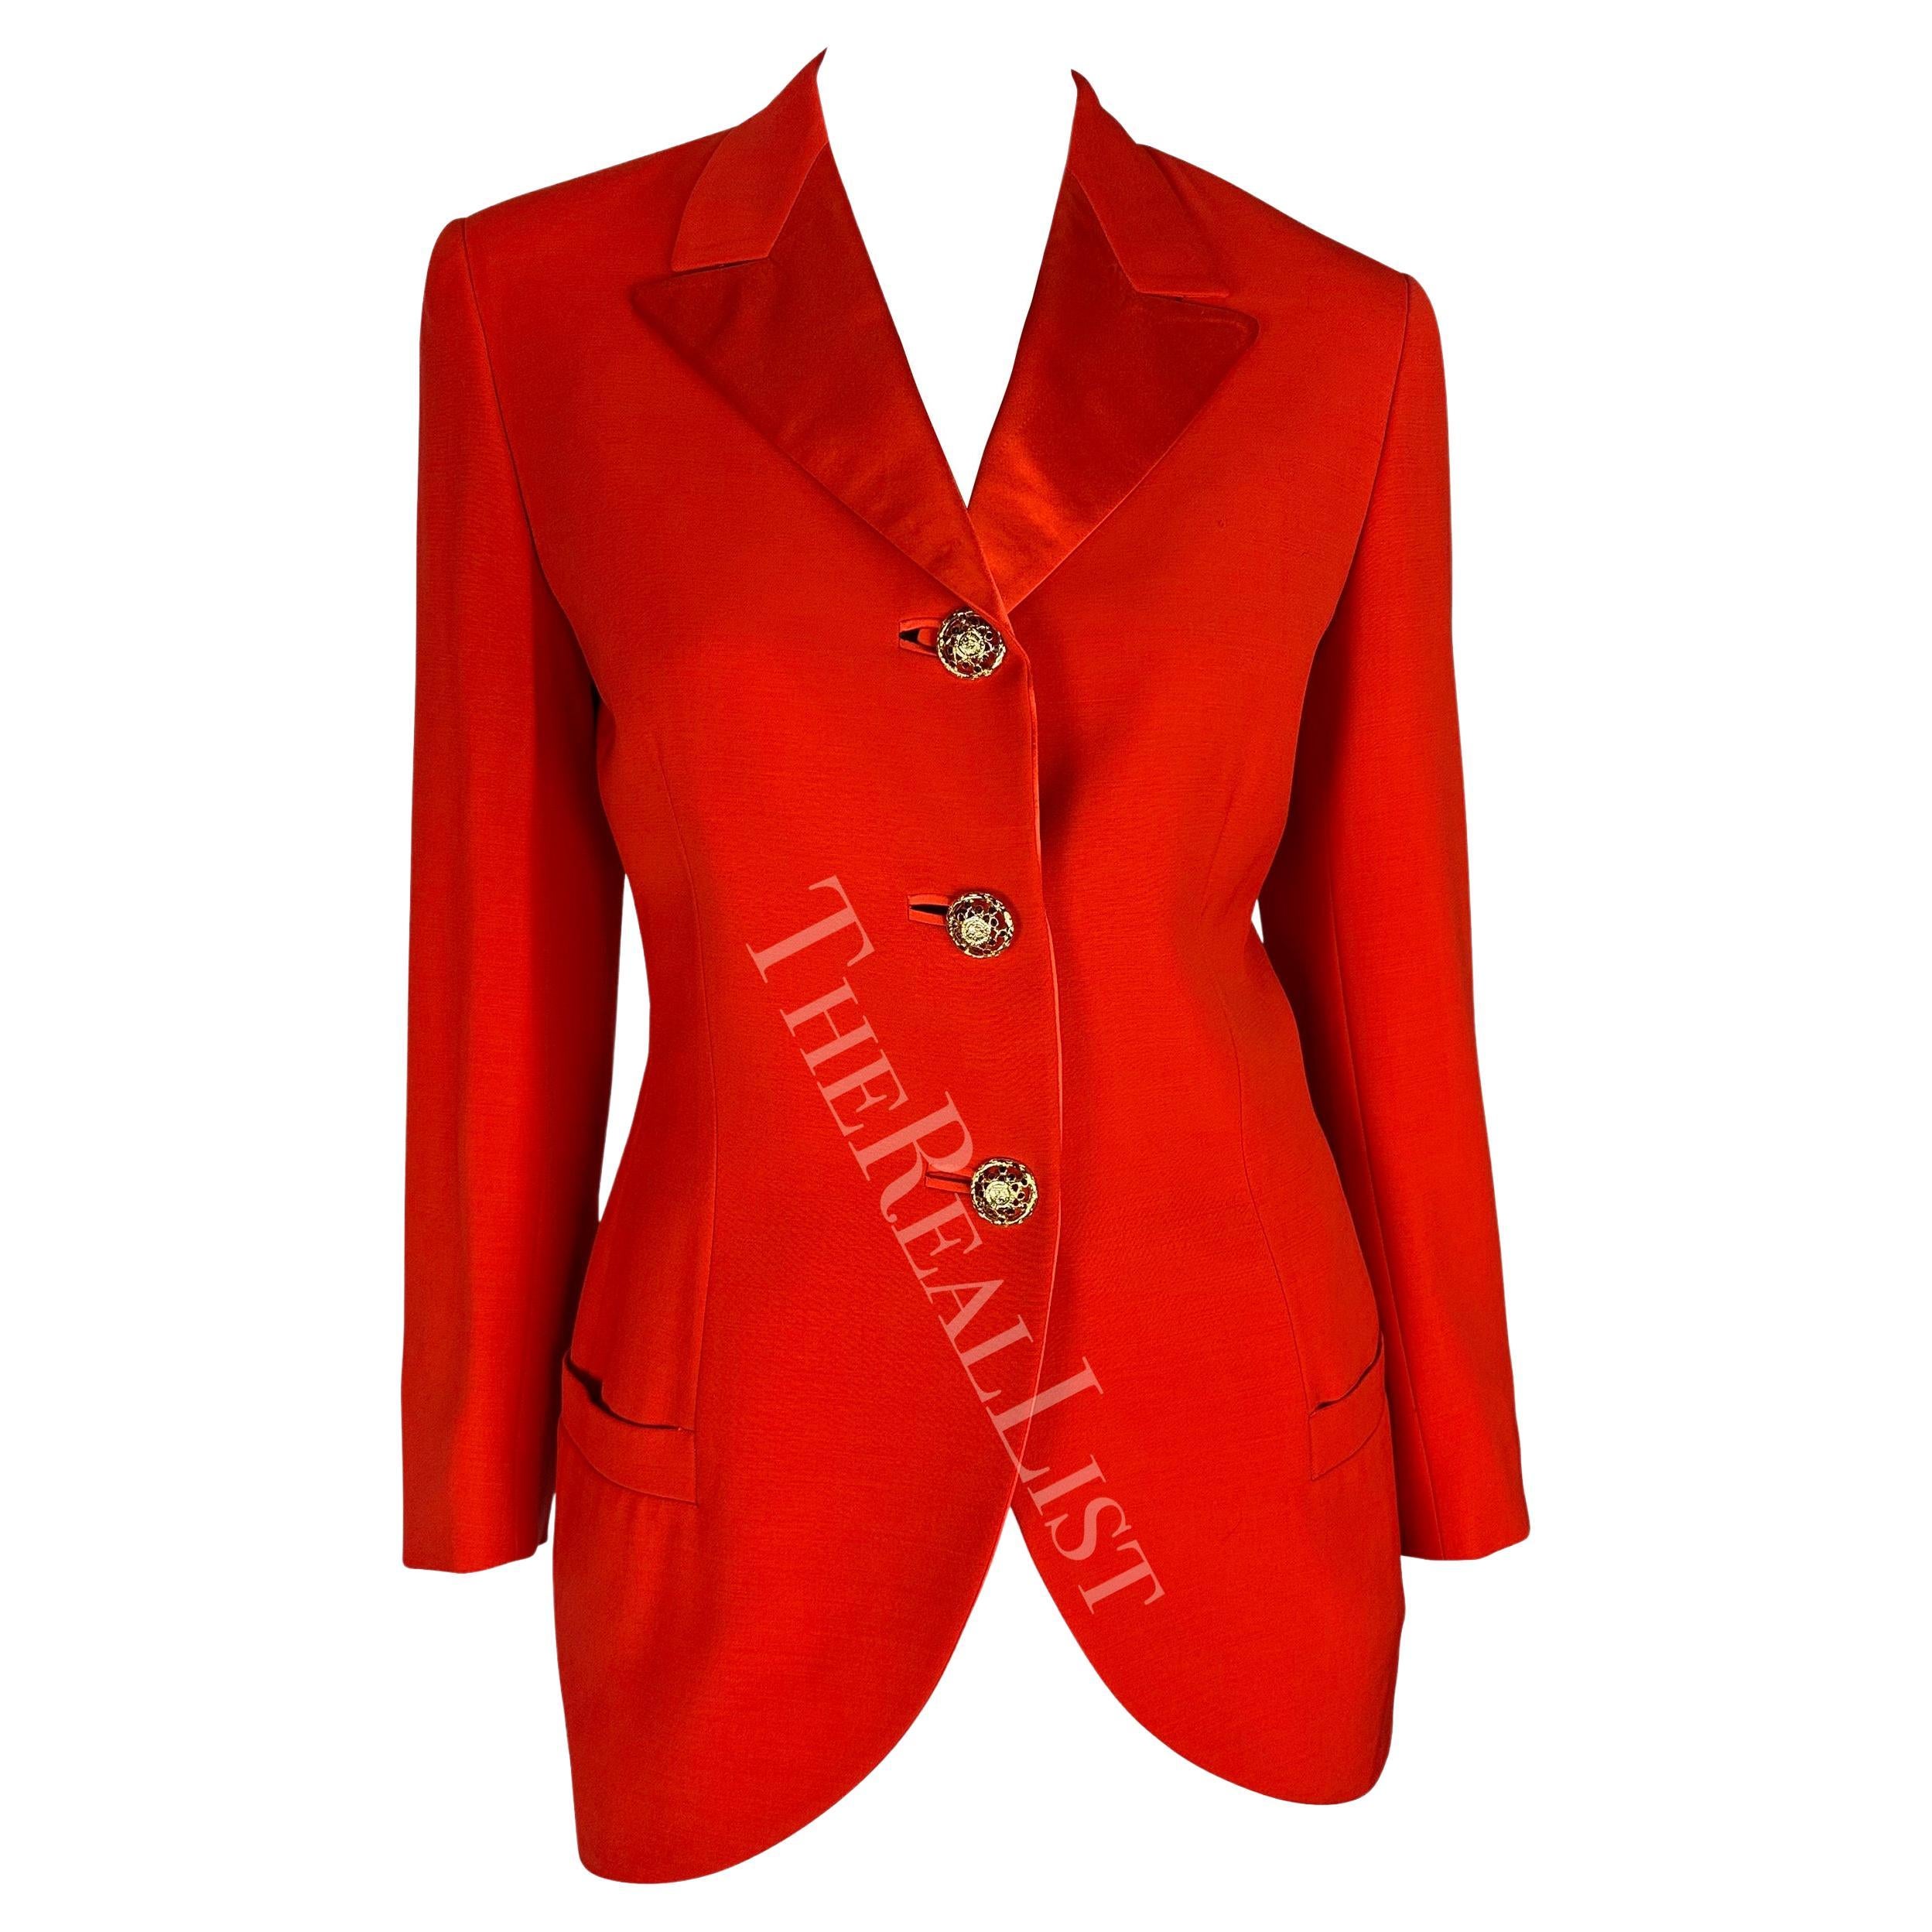 F/W 1992 Gianni Versace Couture Bondage (Miss S&M) Runway Collection Red Blazer For Sale